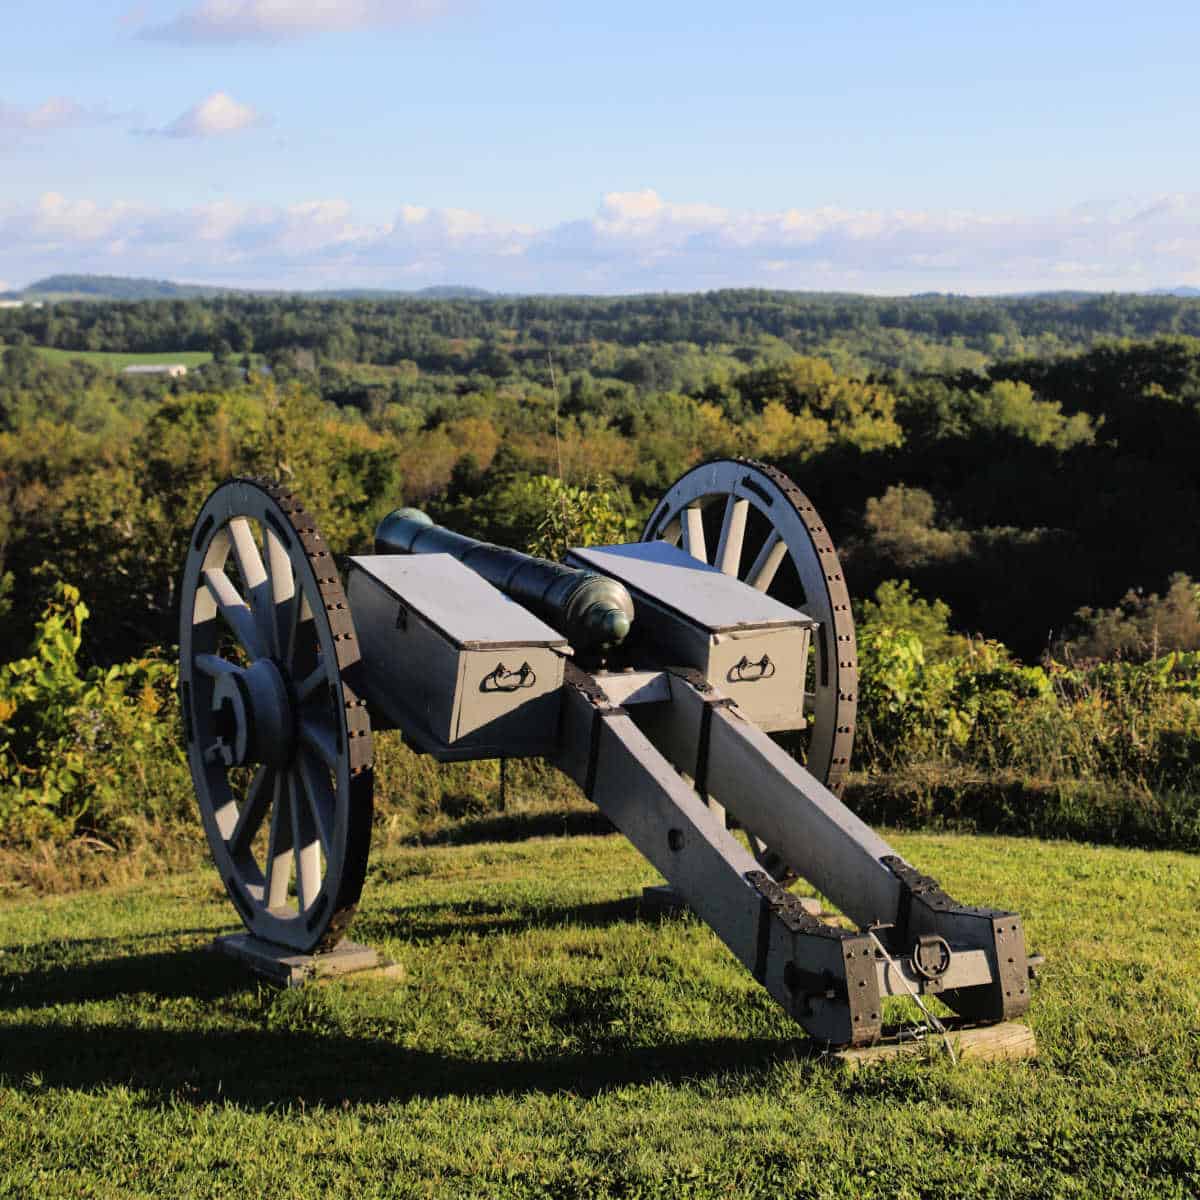 historic cannon over looking fields of trees and grass